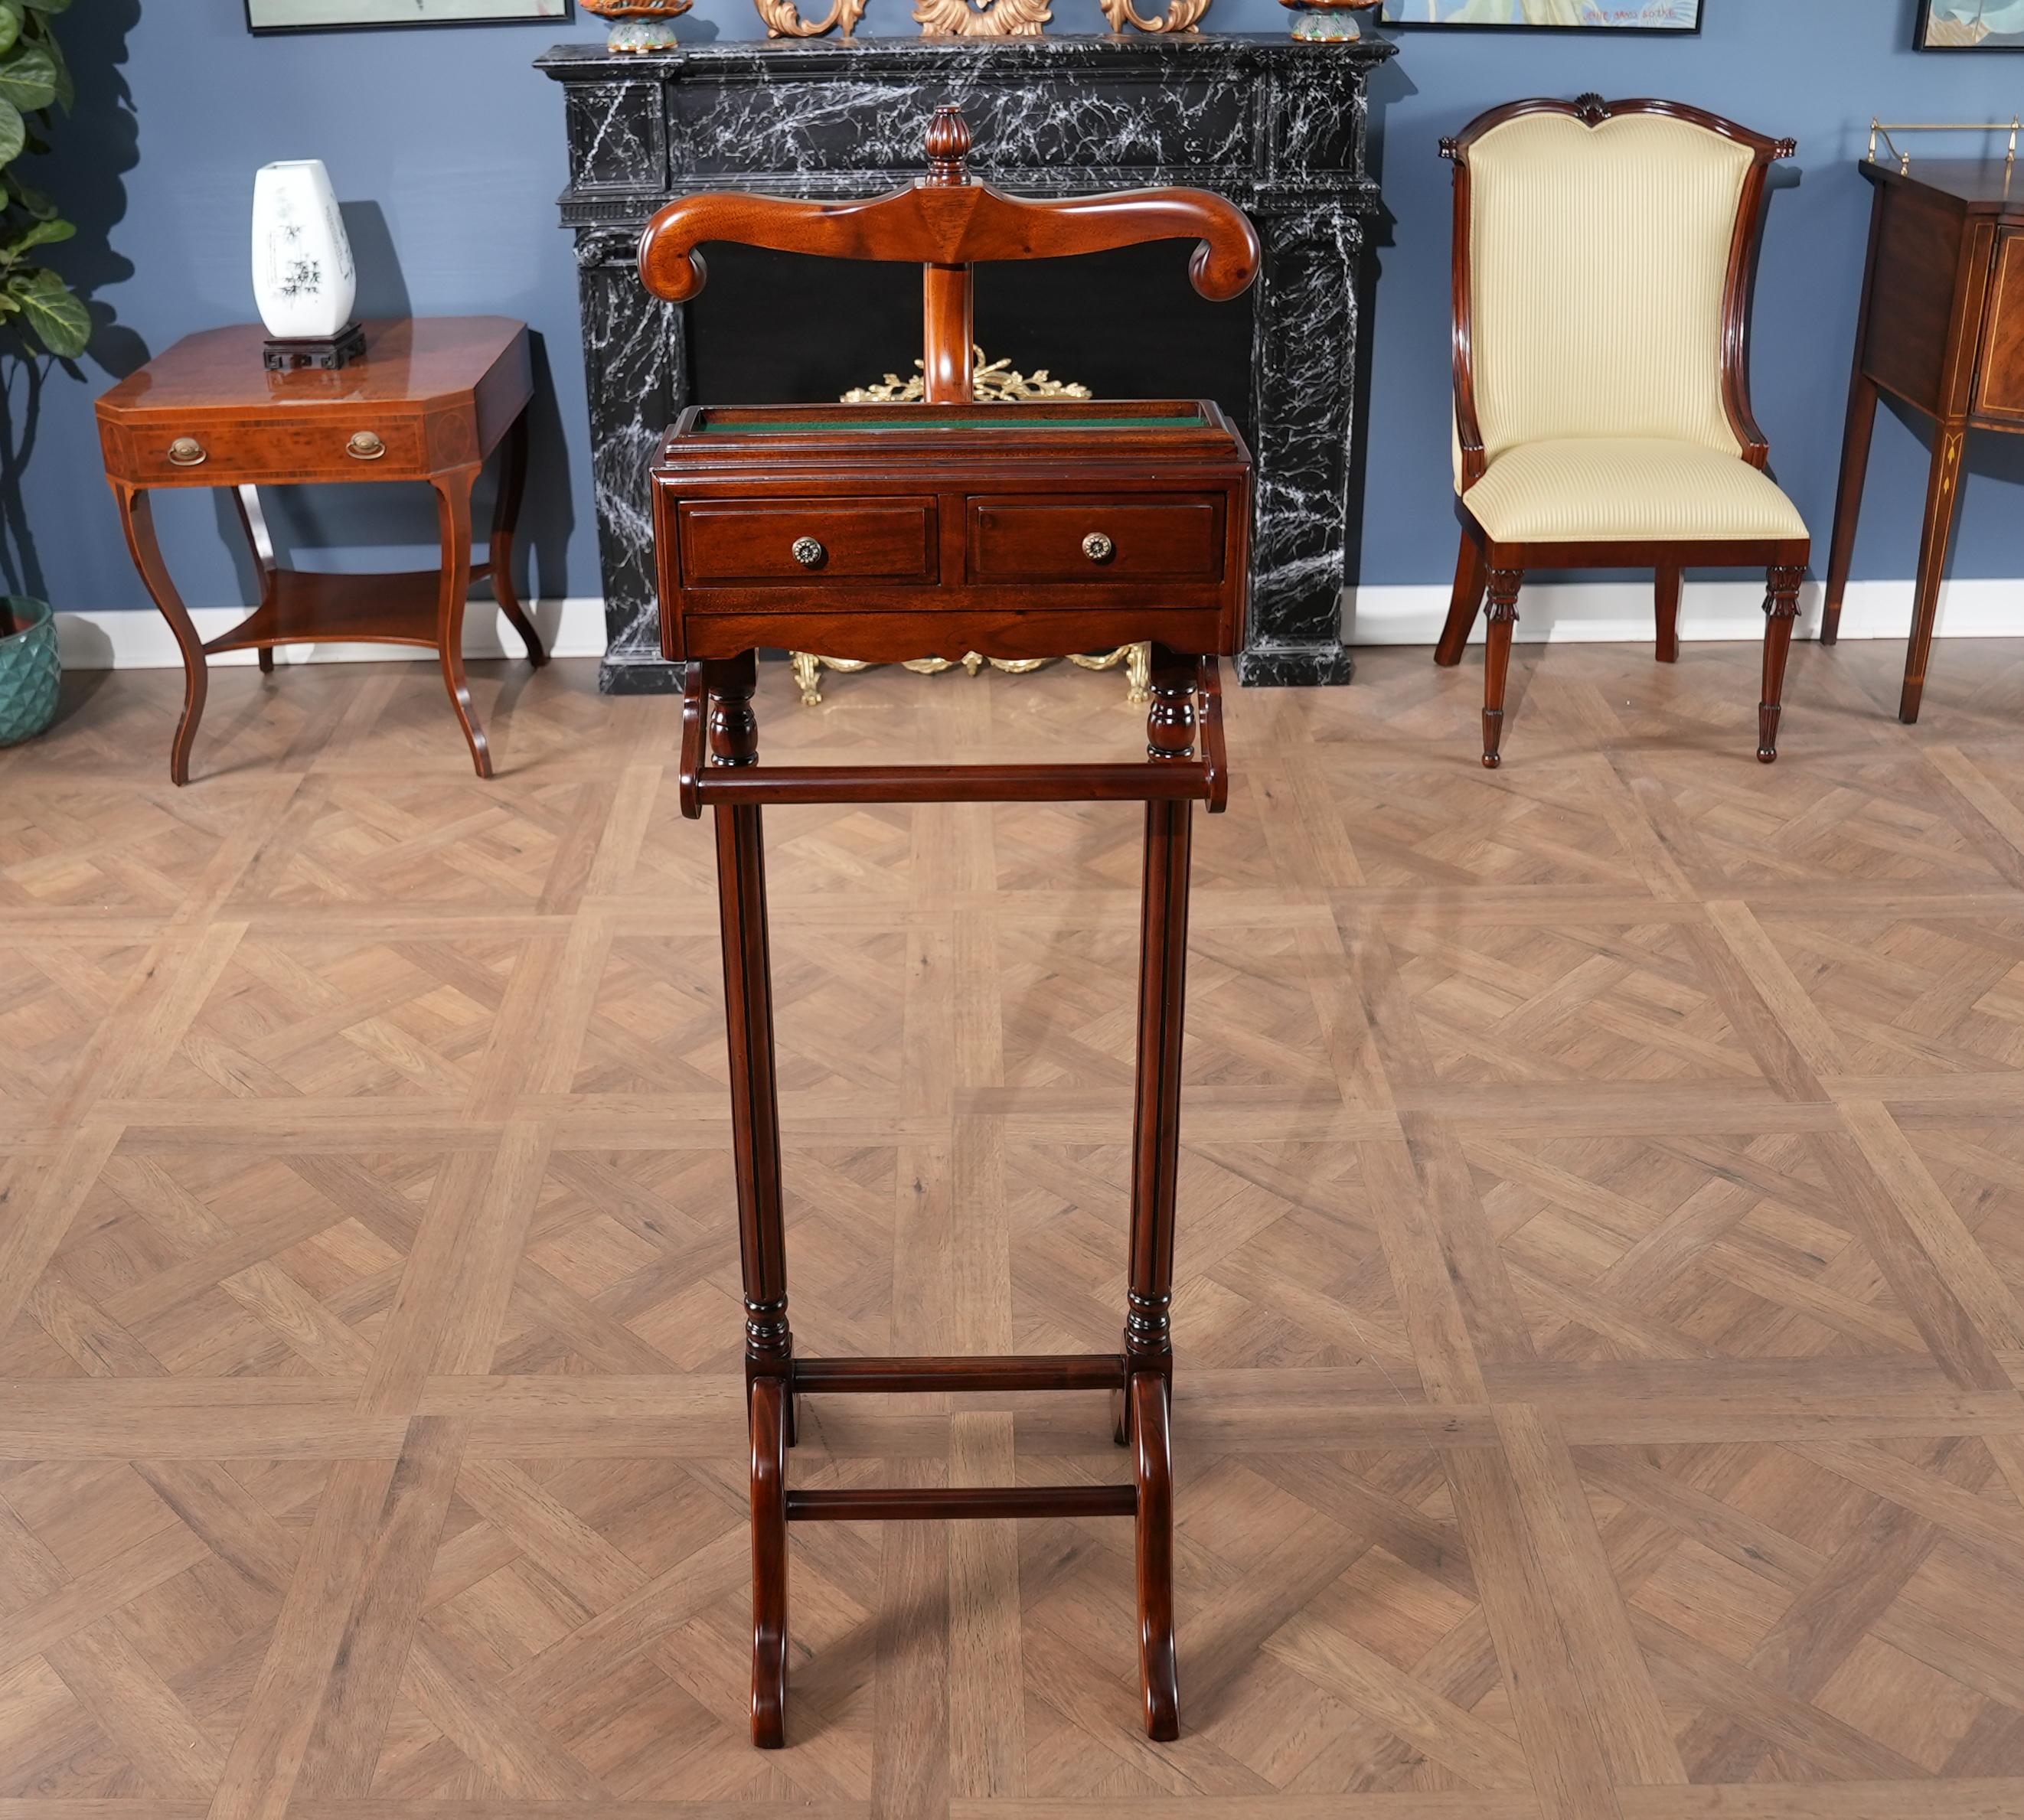 A most useful and decorative item, the Large Mahogany Valet as produced by Niagara Furniture. Using select solid mahogany and mahogany veneers our artisans produce this item using great quality construction as evidenced by the hand carved details,